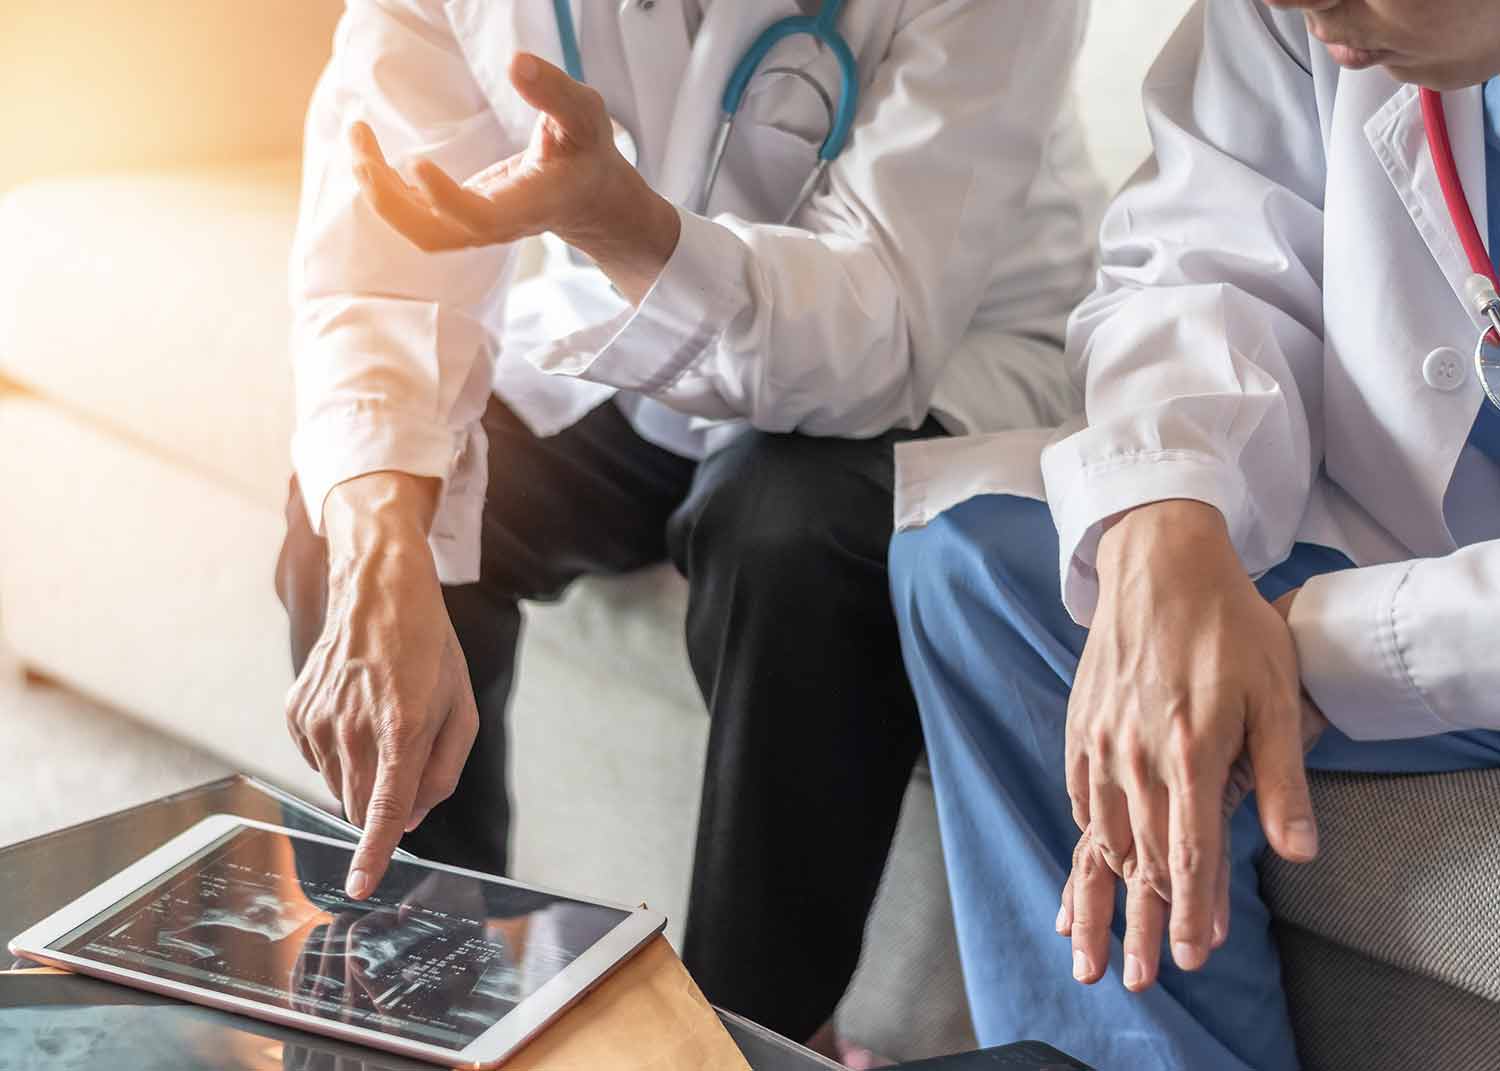 Two Male Florida Orthopedic Surgeons Review Patient Records On A Tablet